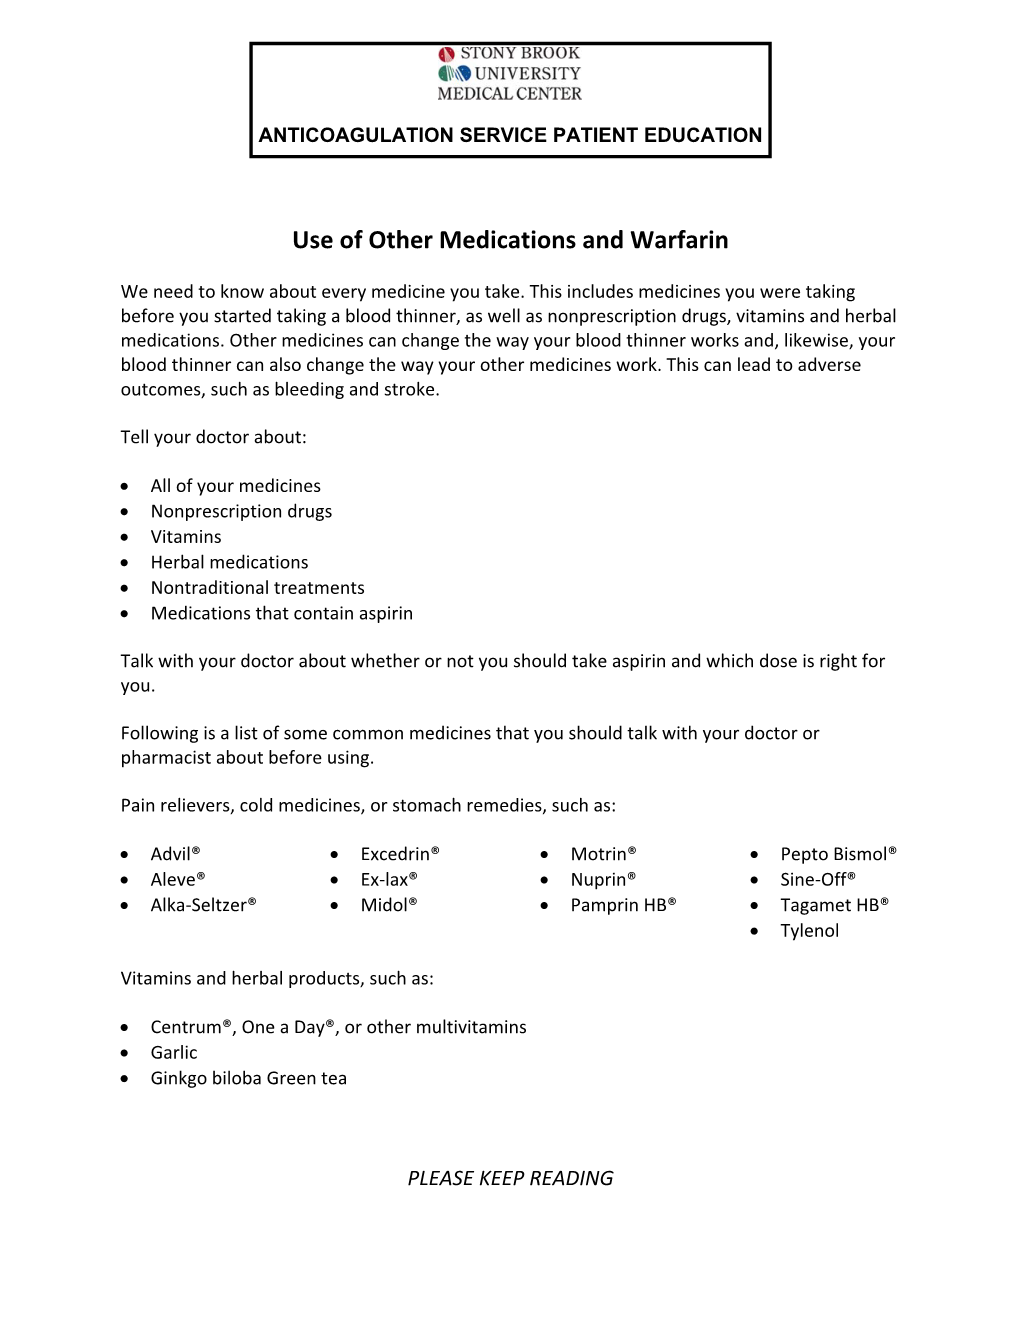 Use of Other Medications and Warfarin